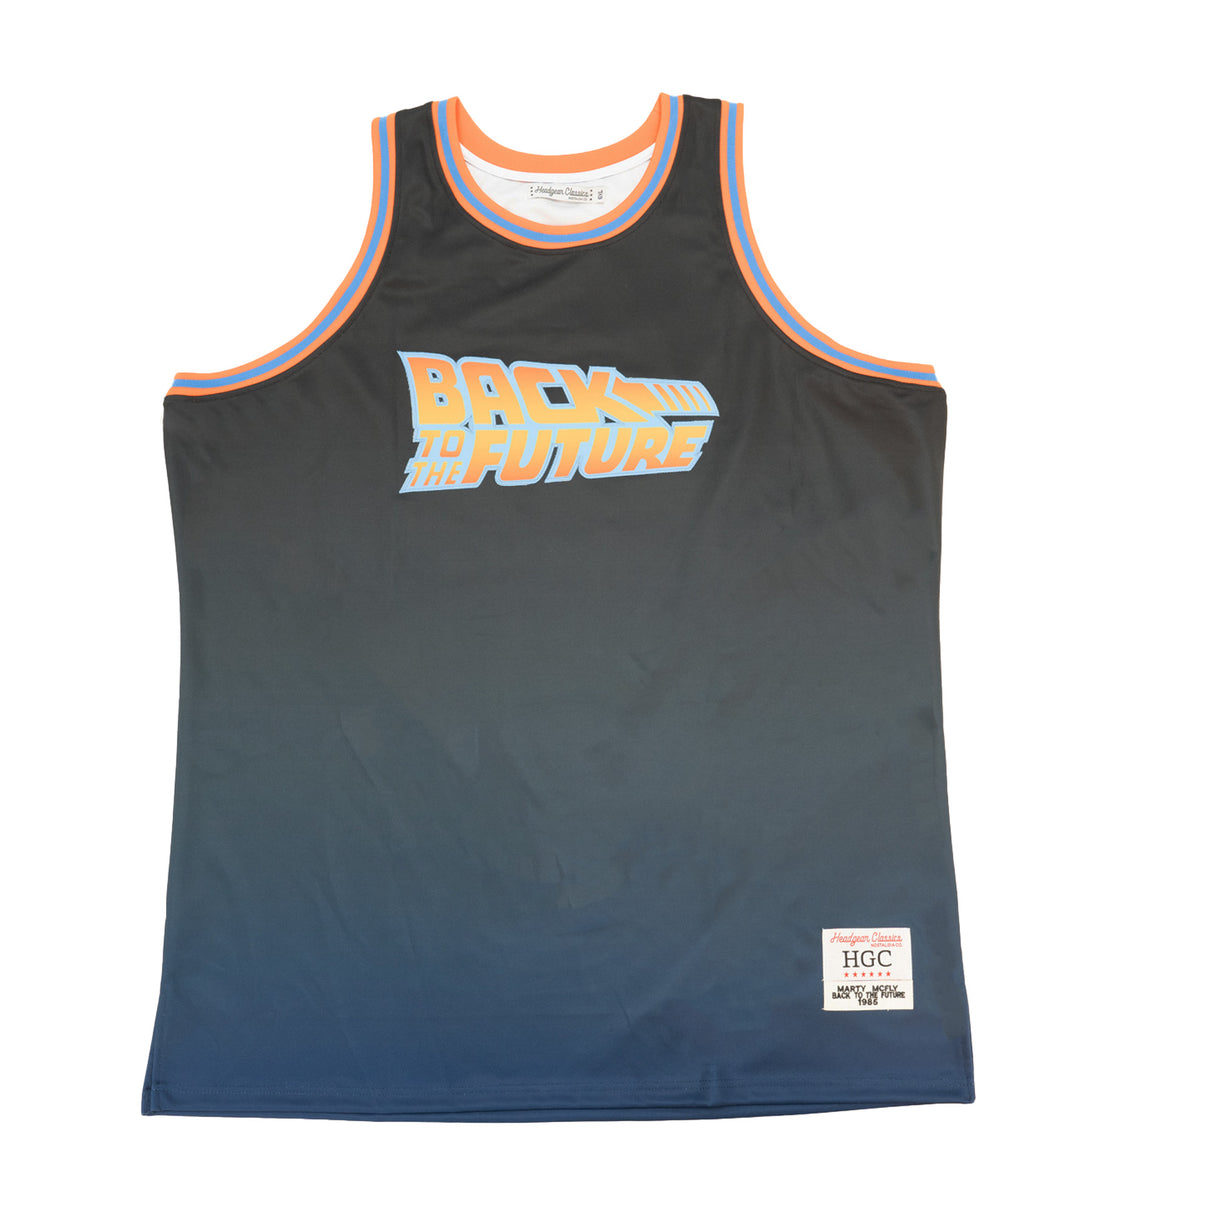 BACK TO THE FUTURE JERSEY